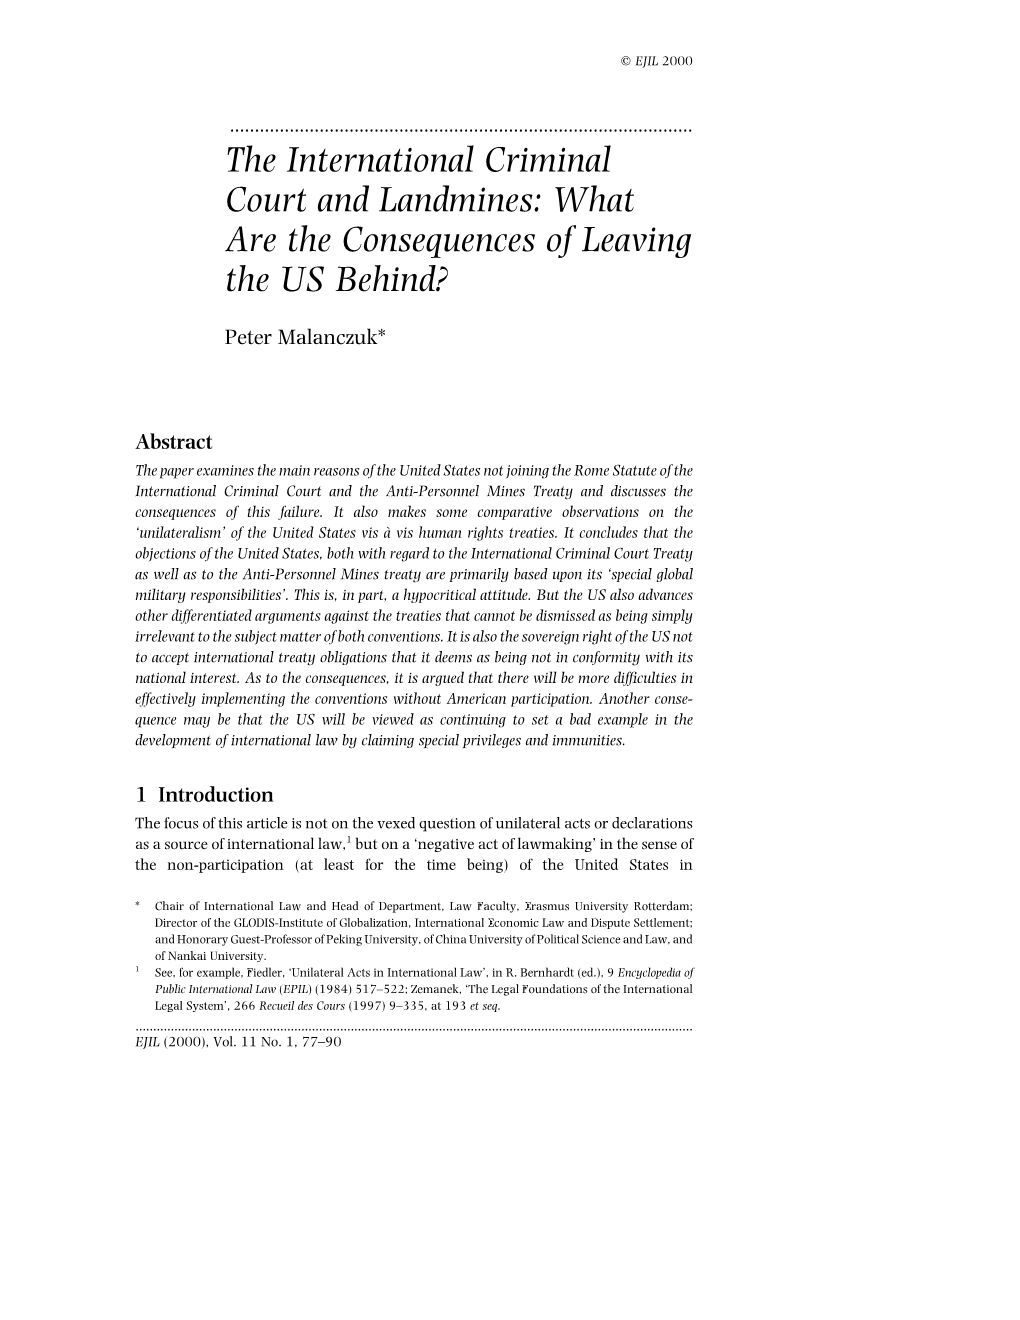 The International Criminal Court and Landmines: What Are the Consequences of Leaving the US Behind?